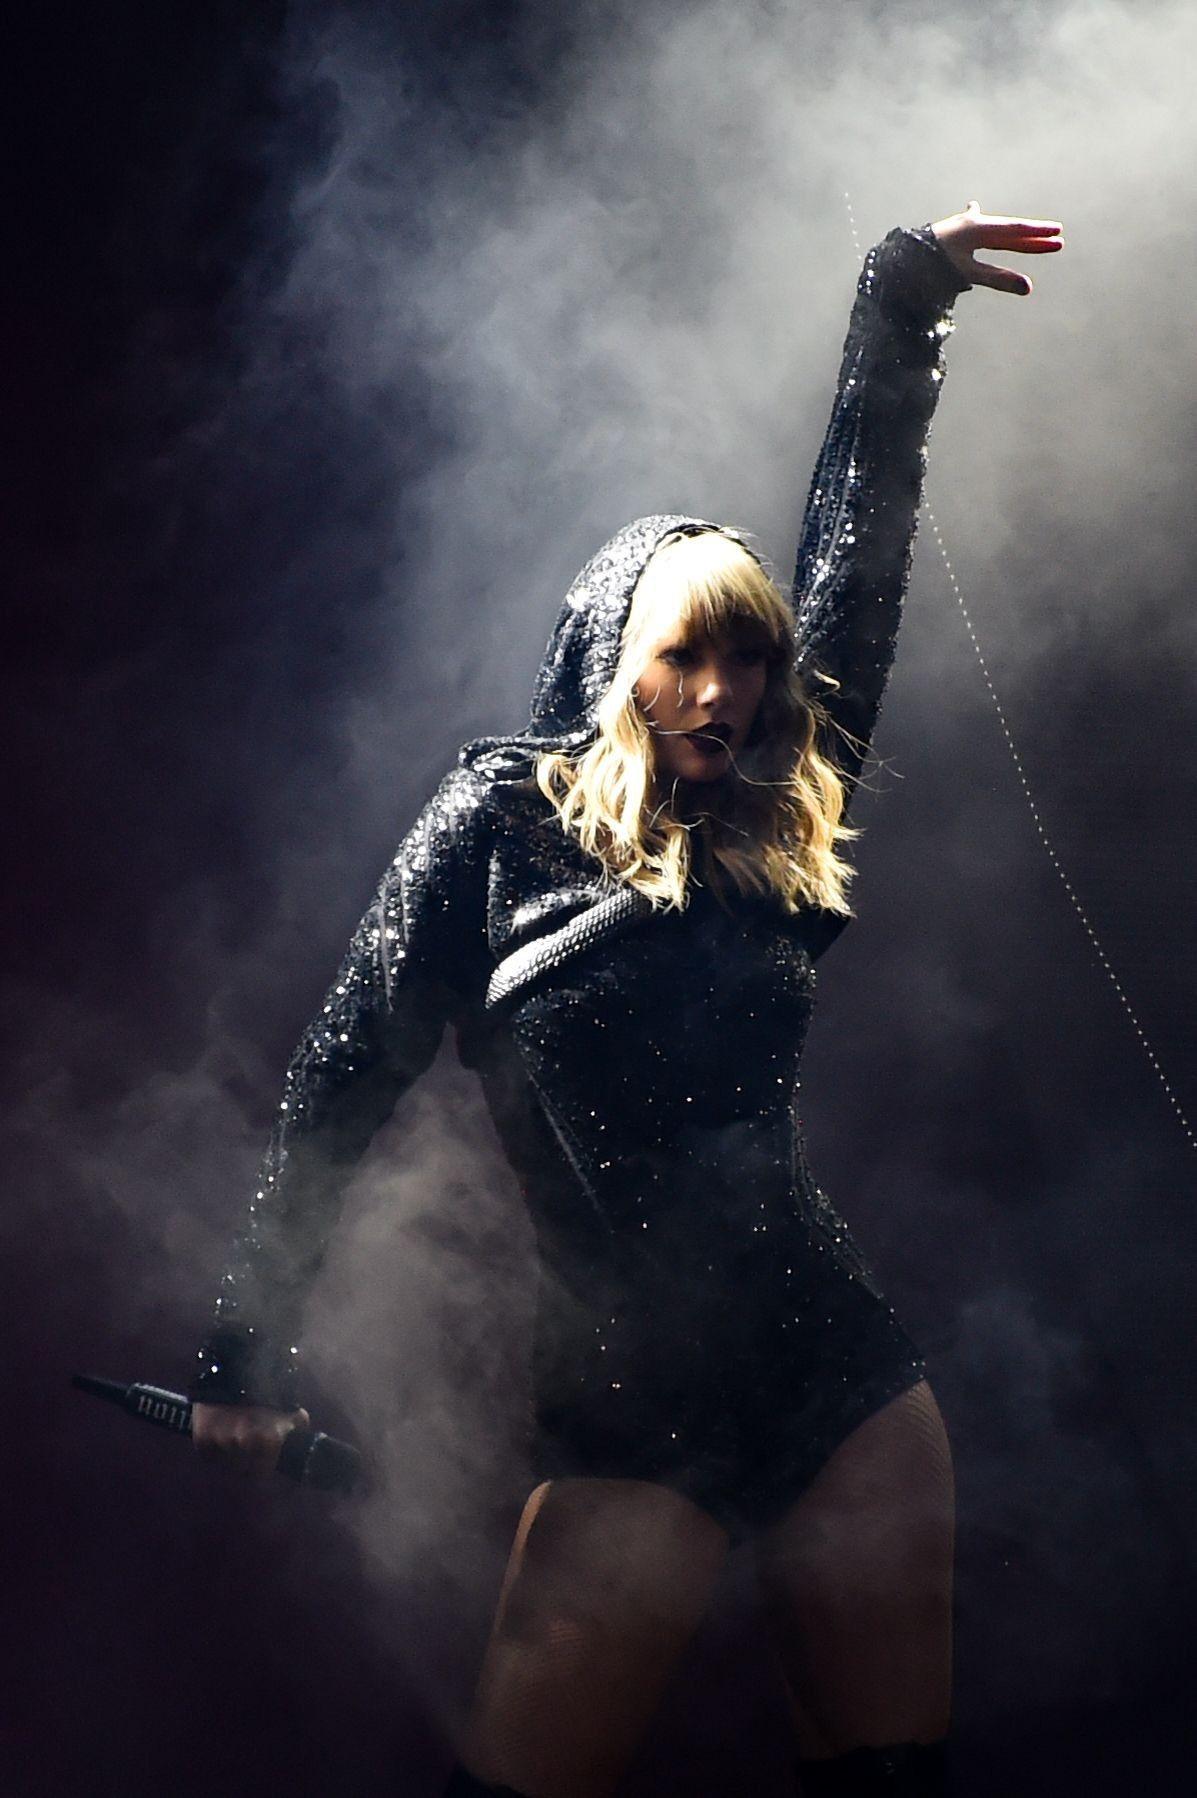 Taylor Swift Reputation Tour Wallpapers Top Free Taylor Swift Reputation Tour Backgrounds 1584